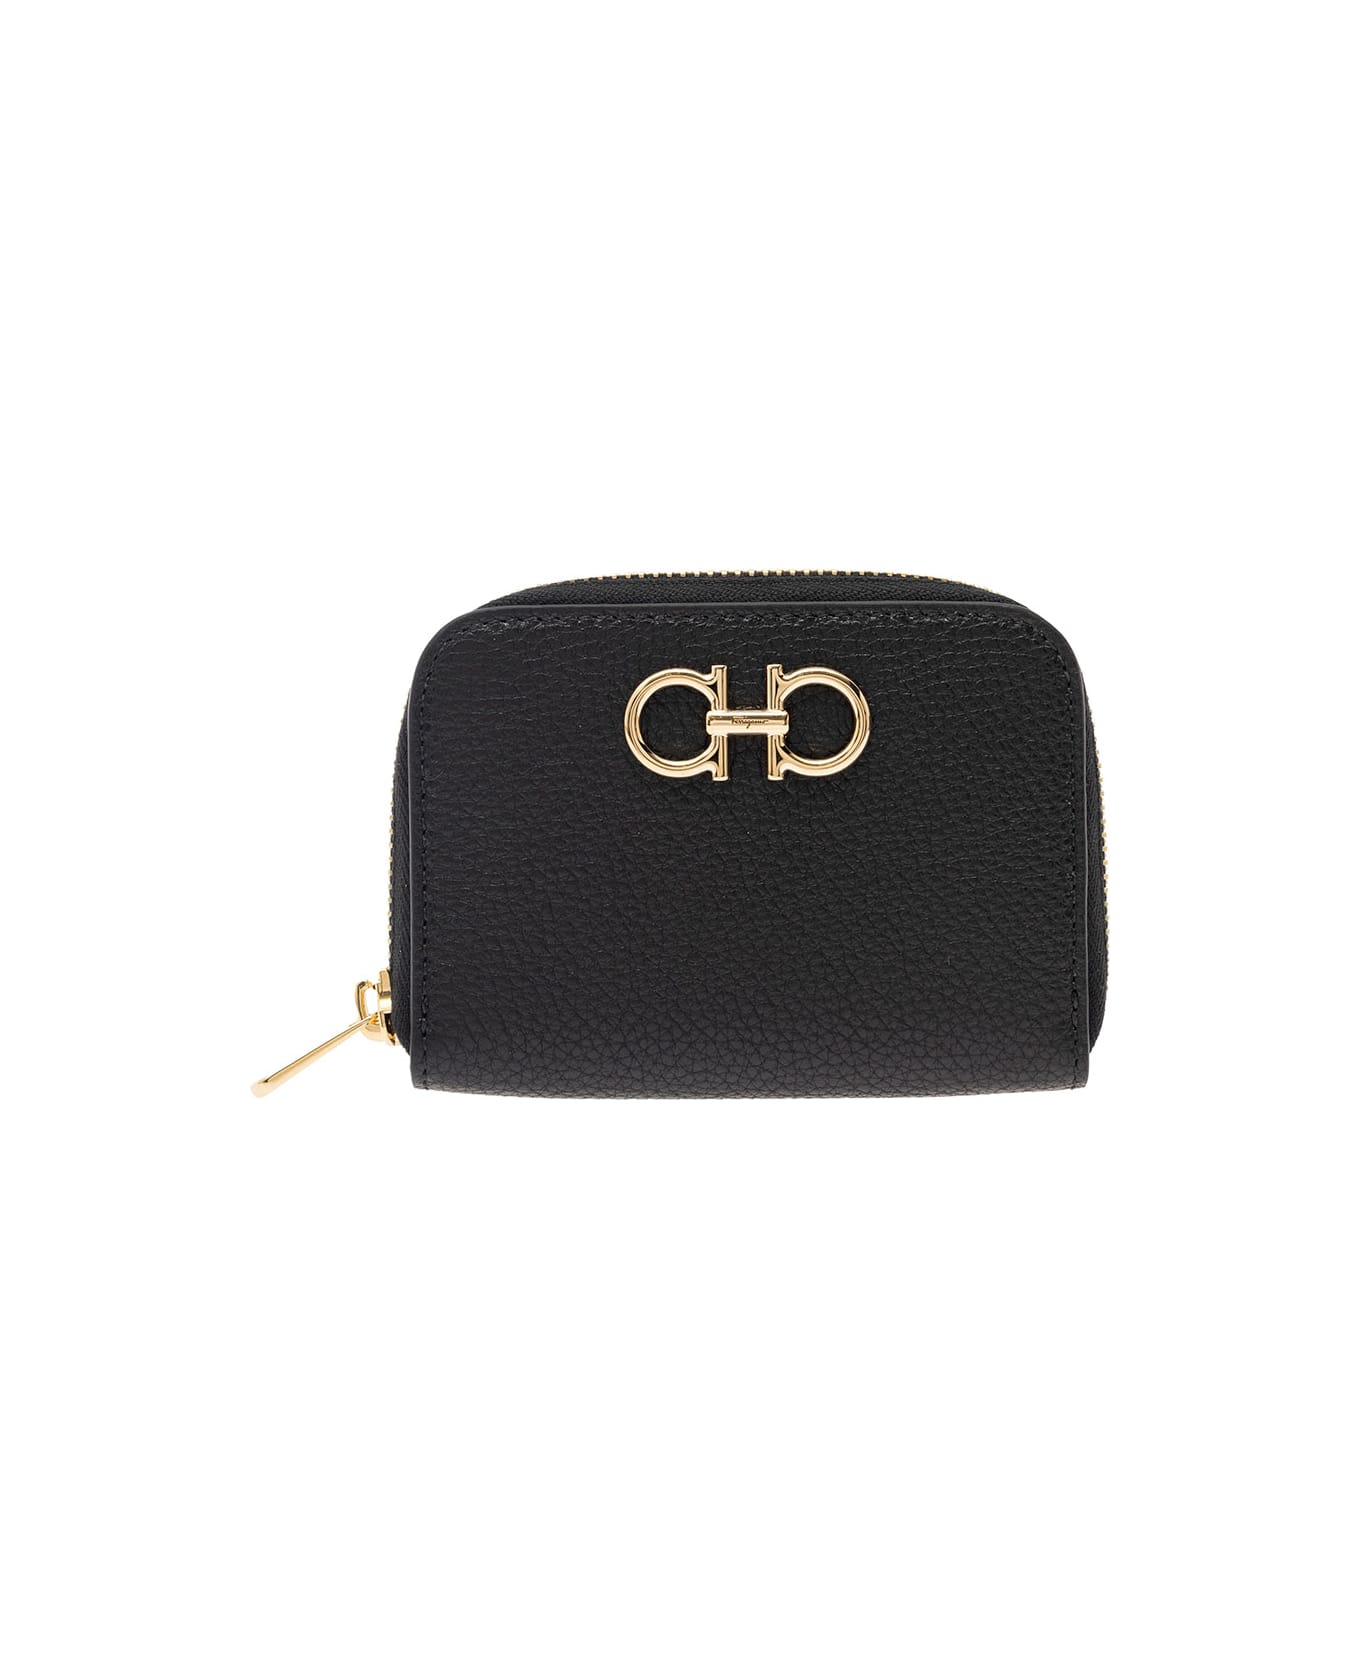 Ferragamo Black Coin Purse With Gancino Logo In Hammered Leaher Woman - Black